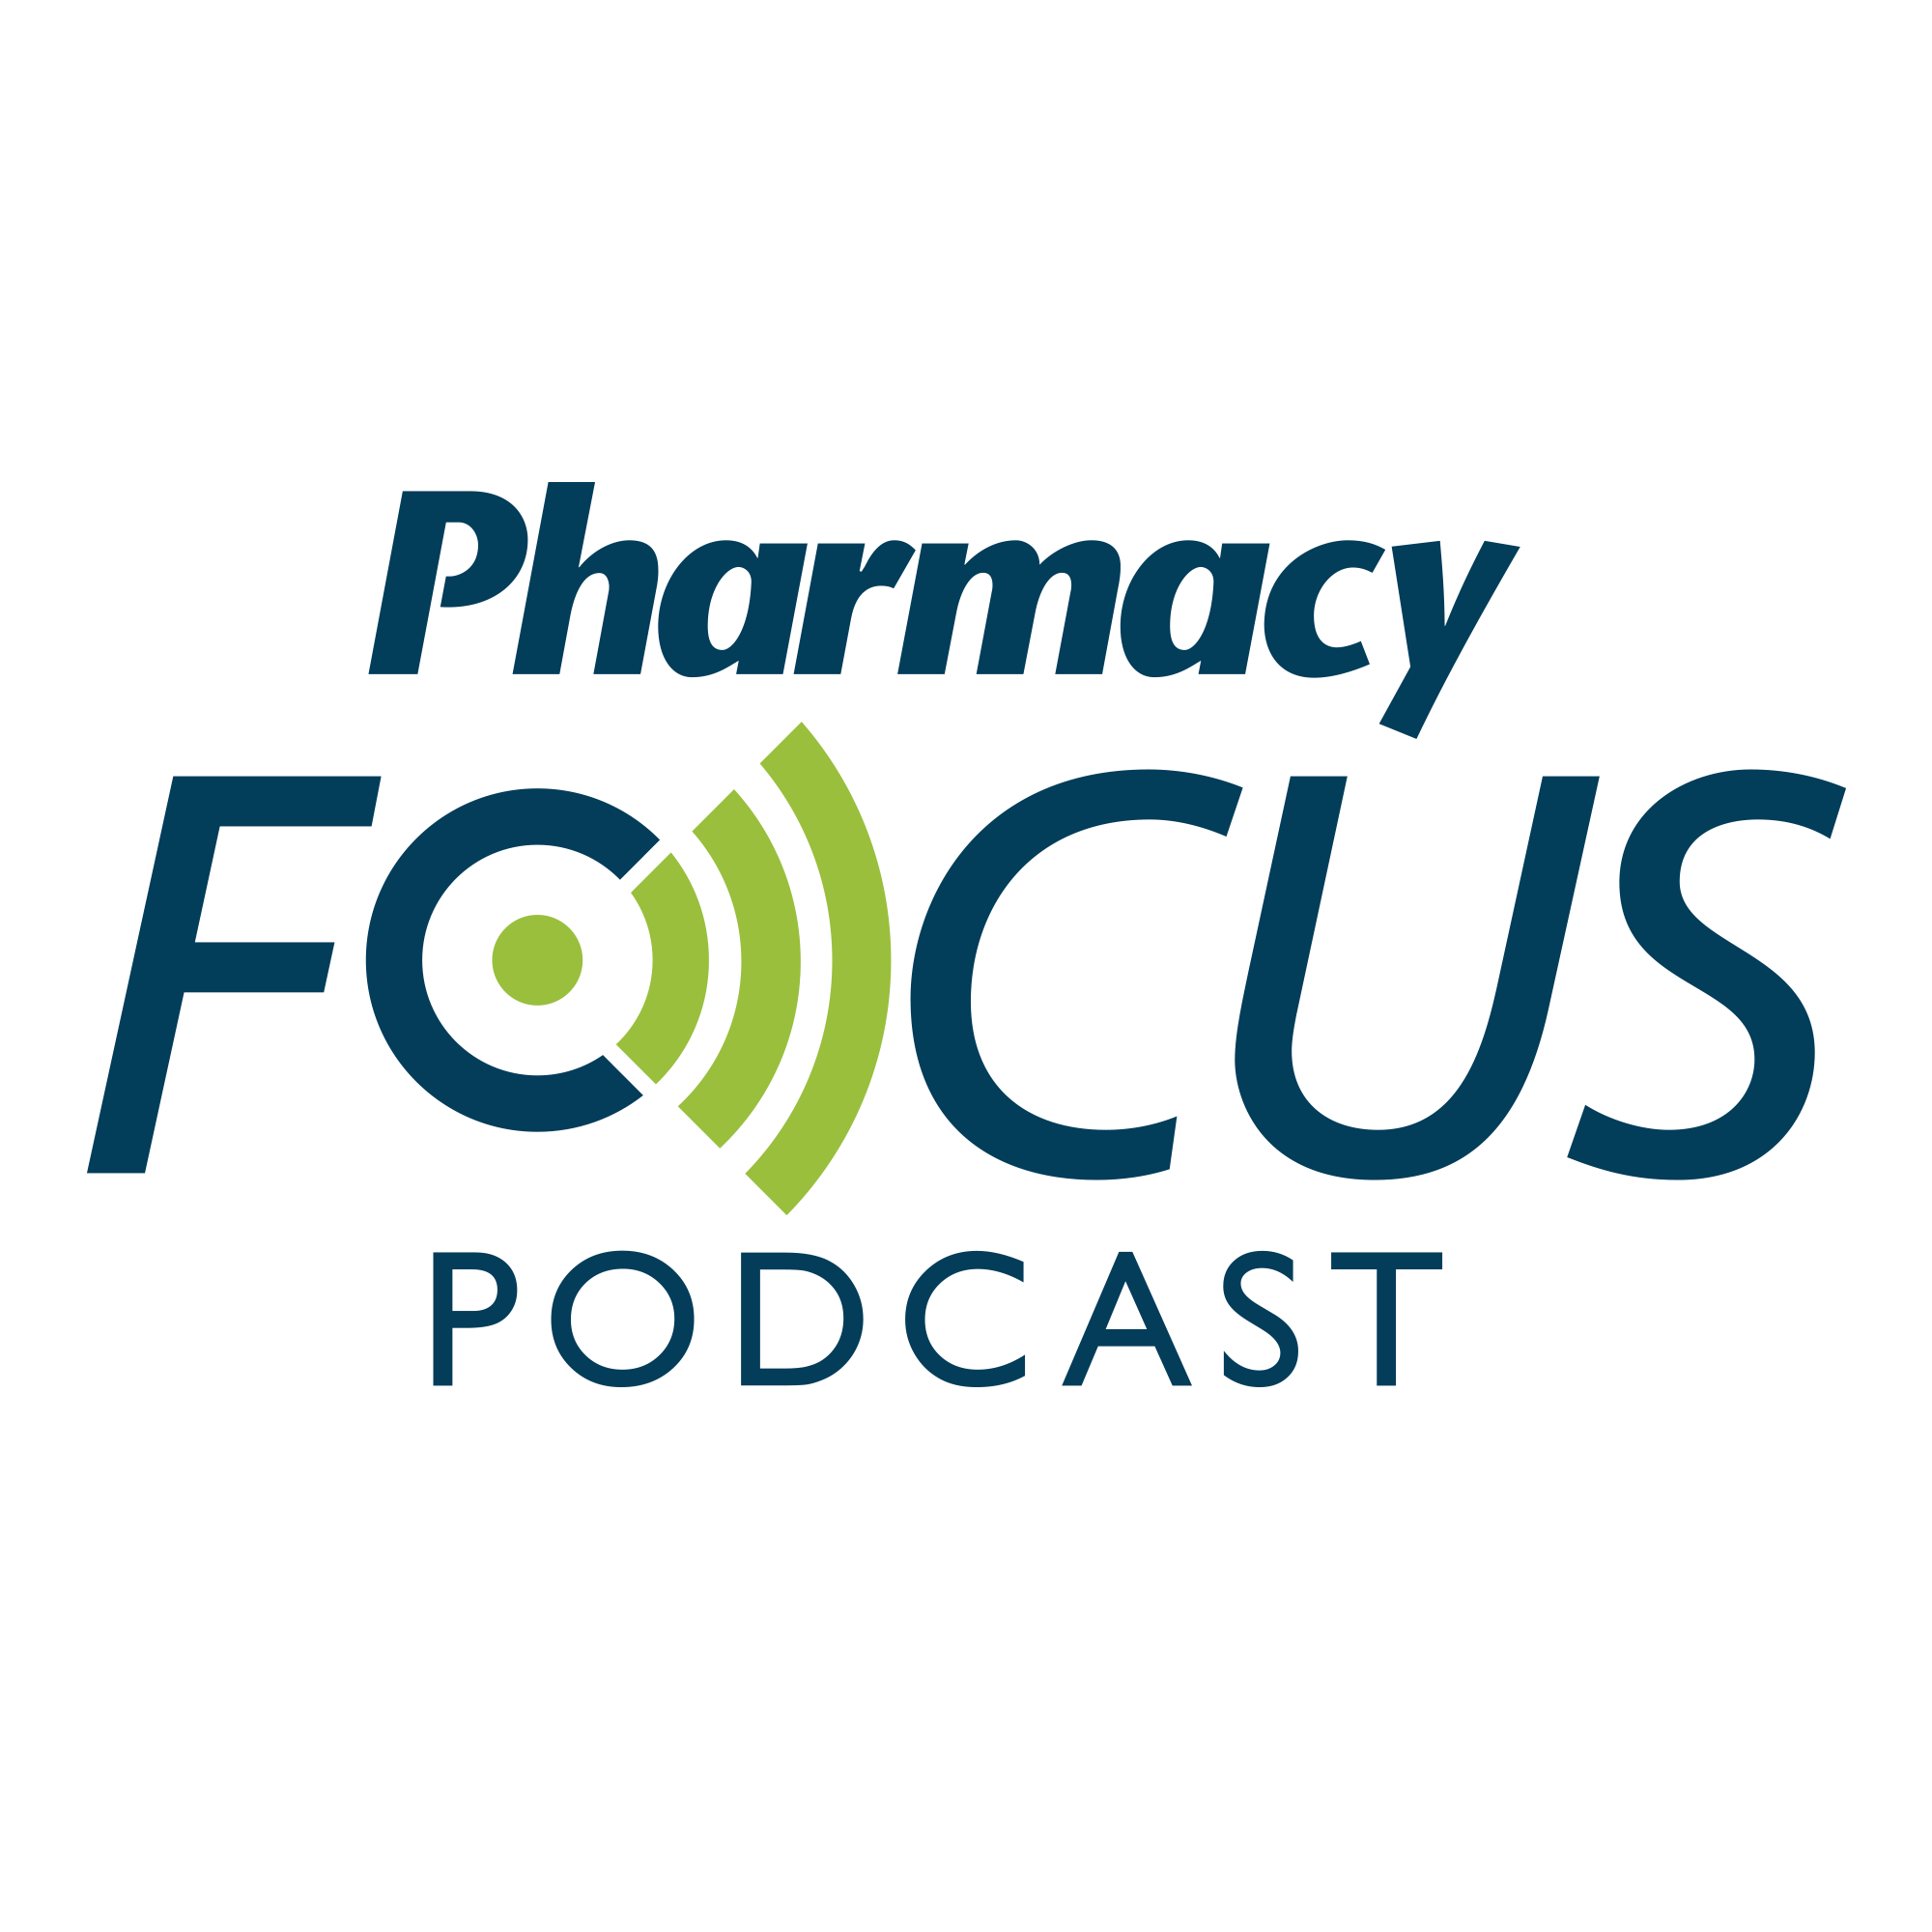 Pharmacy Focus: Conversations On Reproductive Health - Episode 1